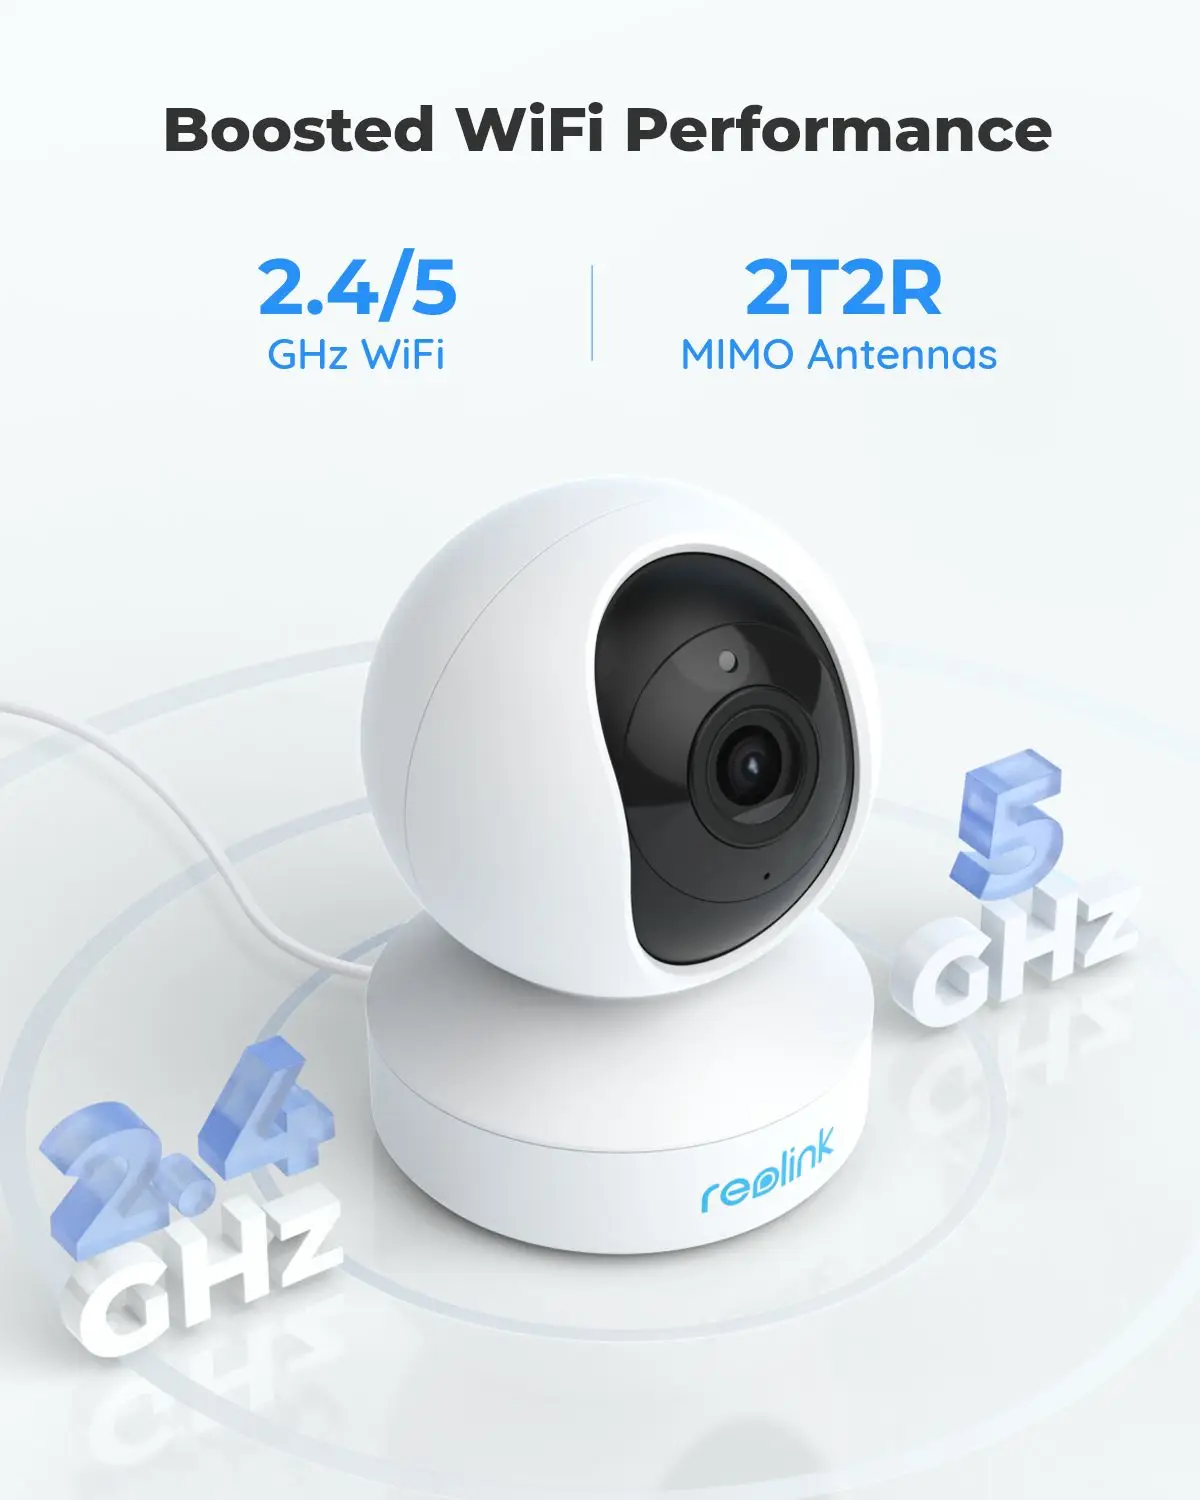 Reolink 5MP WiFi Camera 2.4G/5G 3x Optical Zoom Pan&Tilt Security Cam 2-way Audio Baby Monitor Home Surveillance Cameras E1 Zoom images - 6